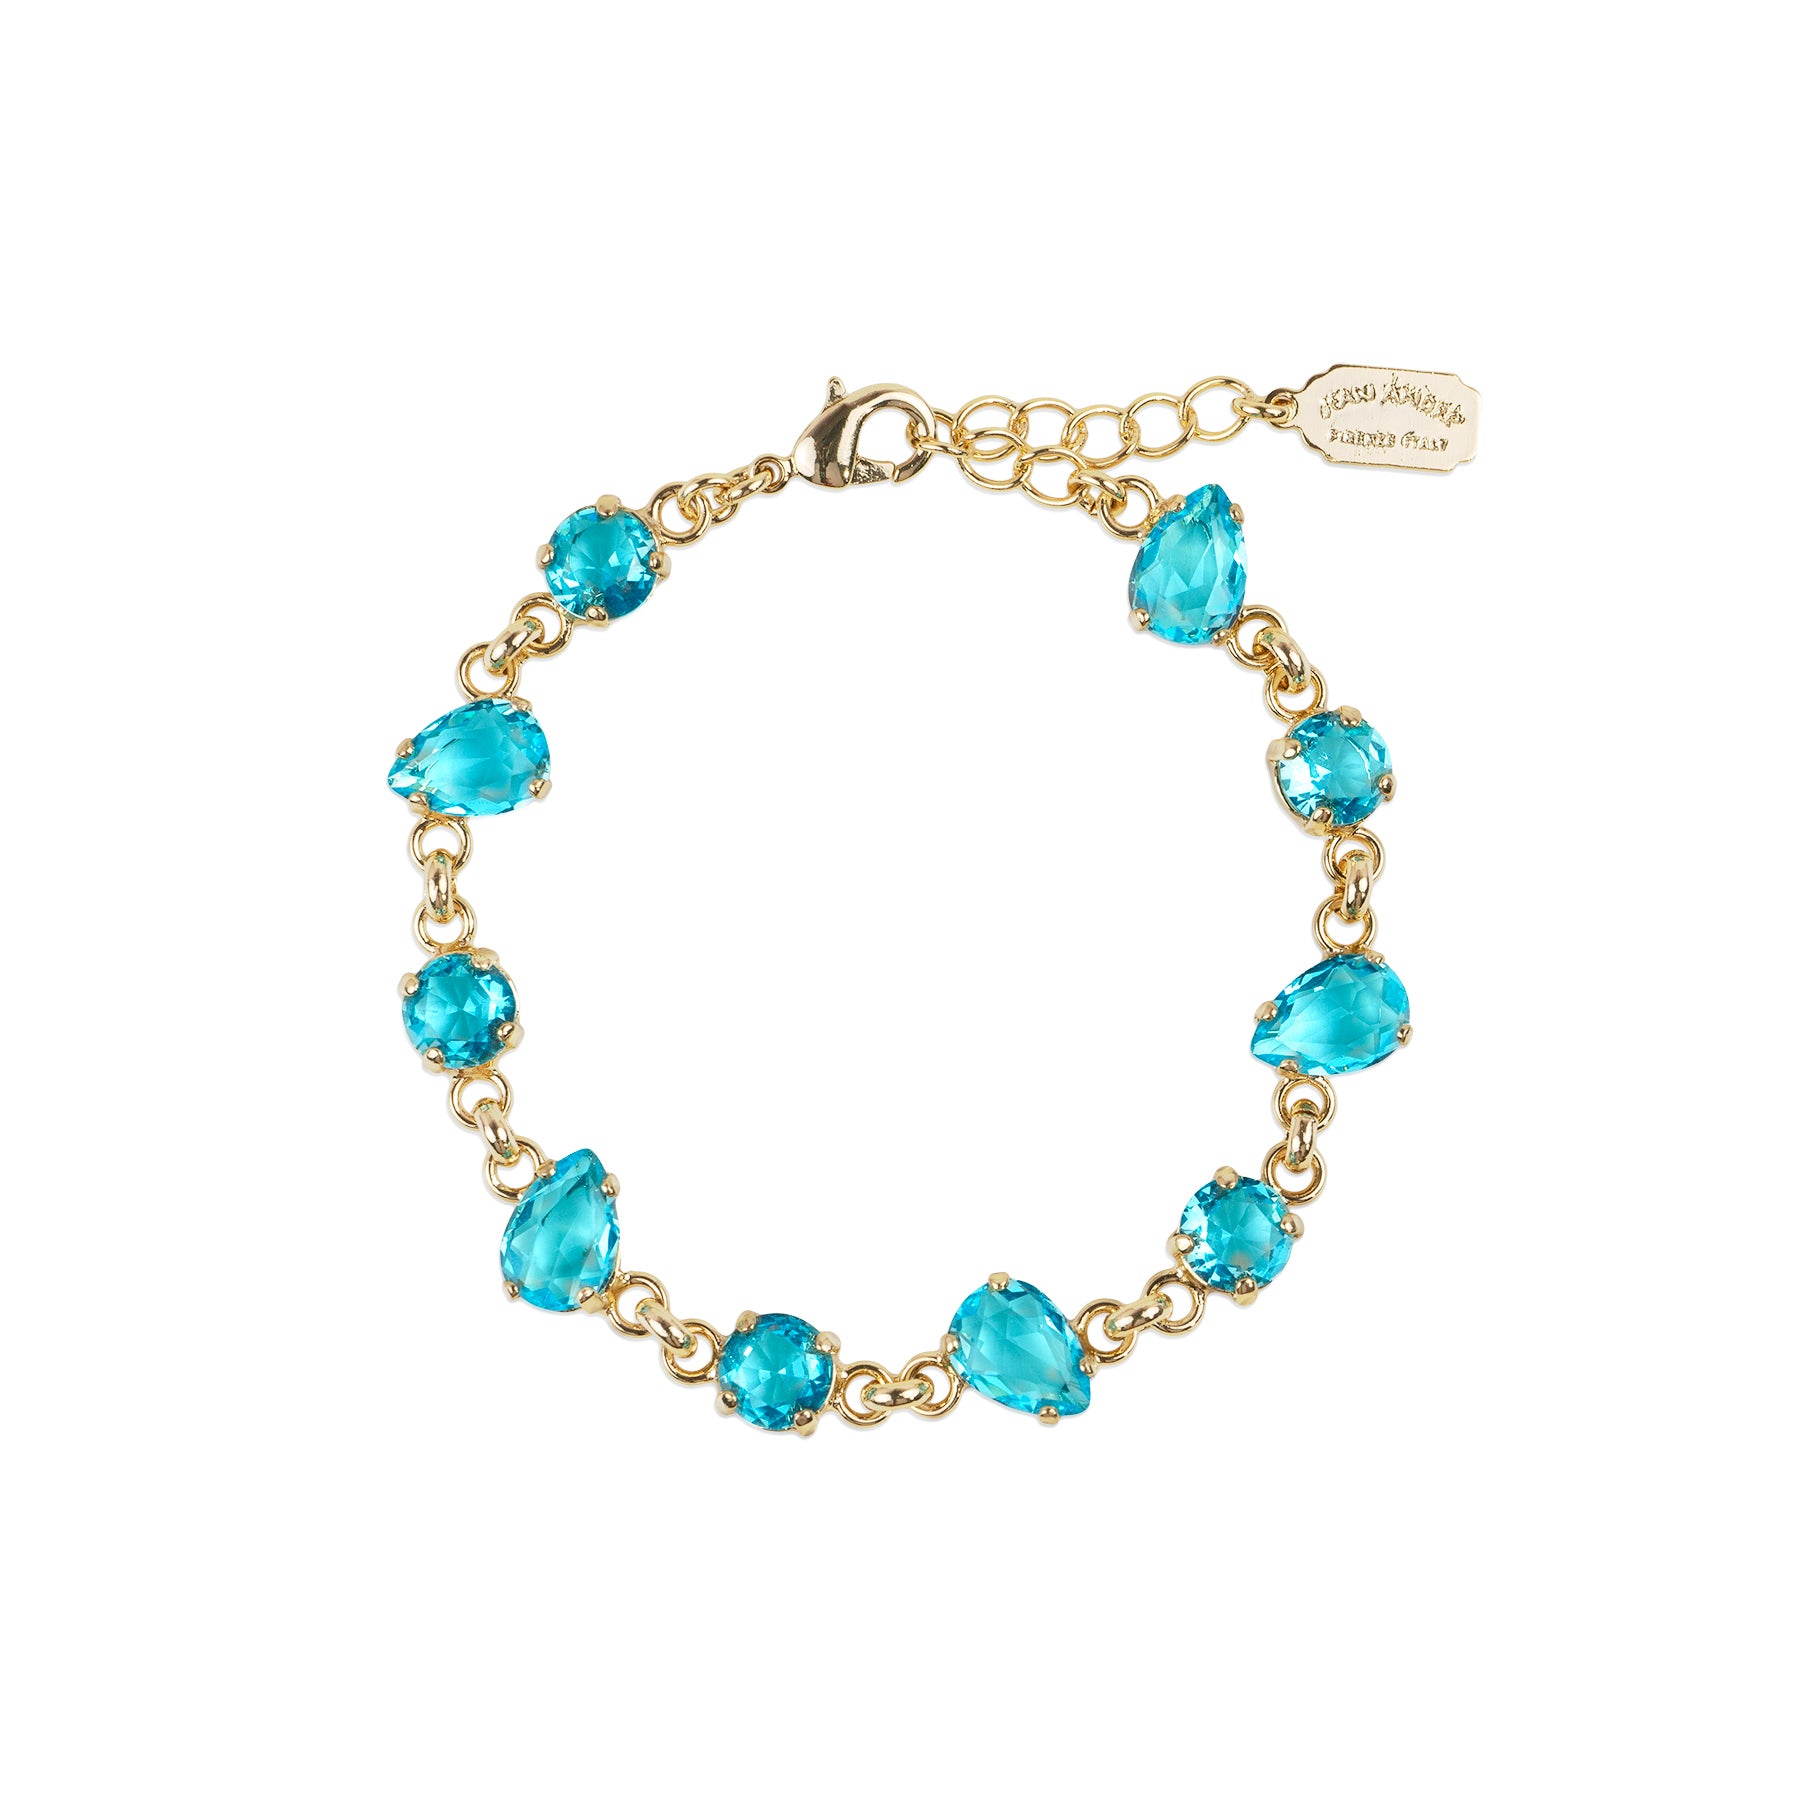 Bracelet with crystal drops